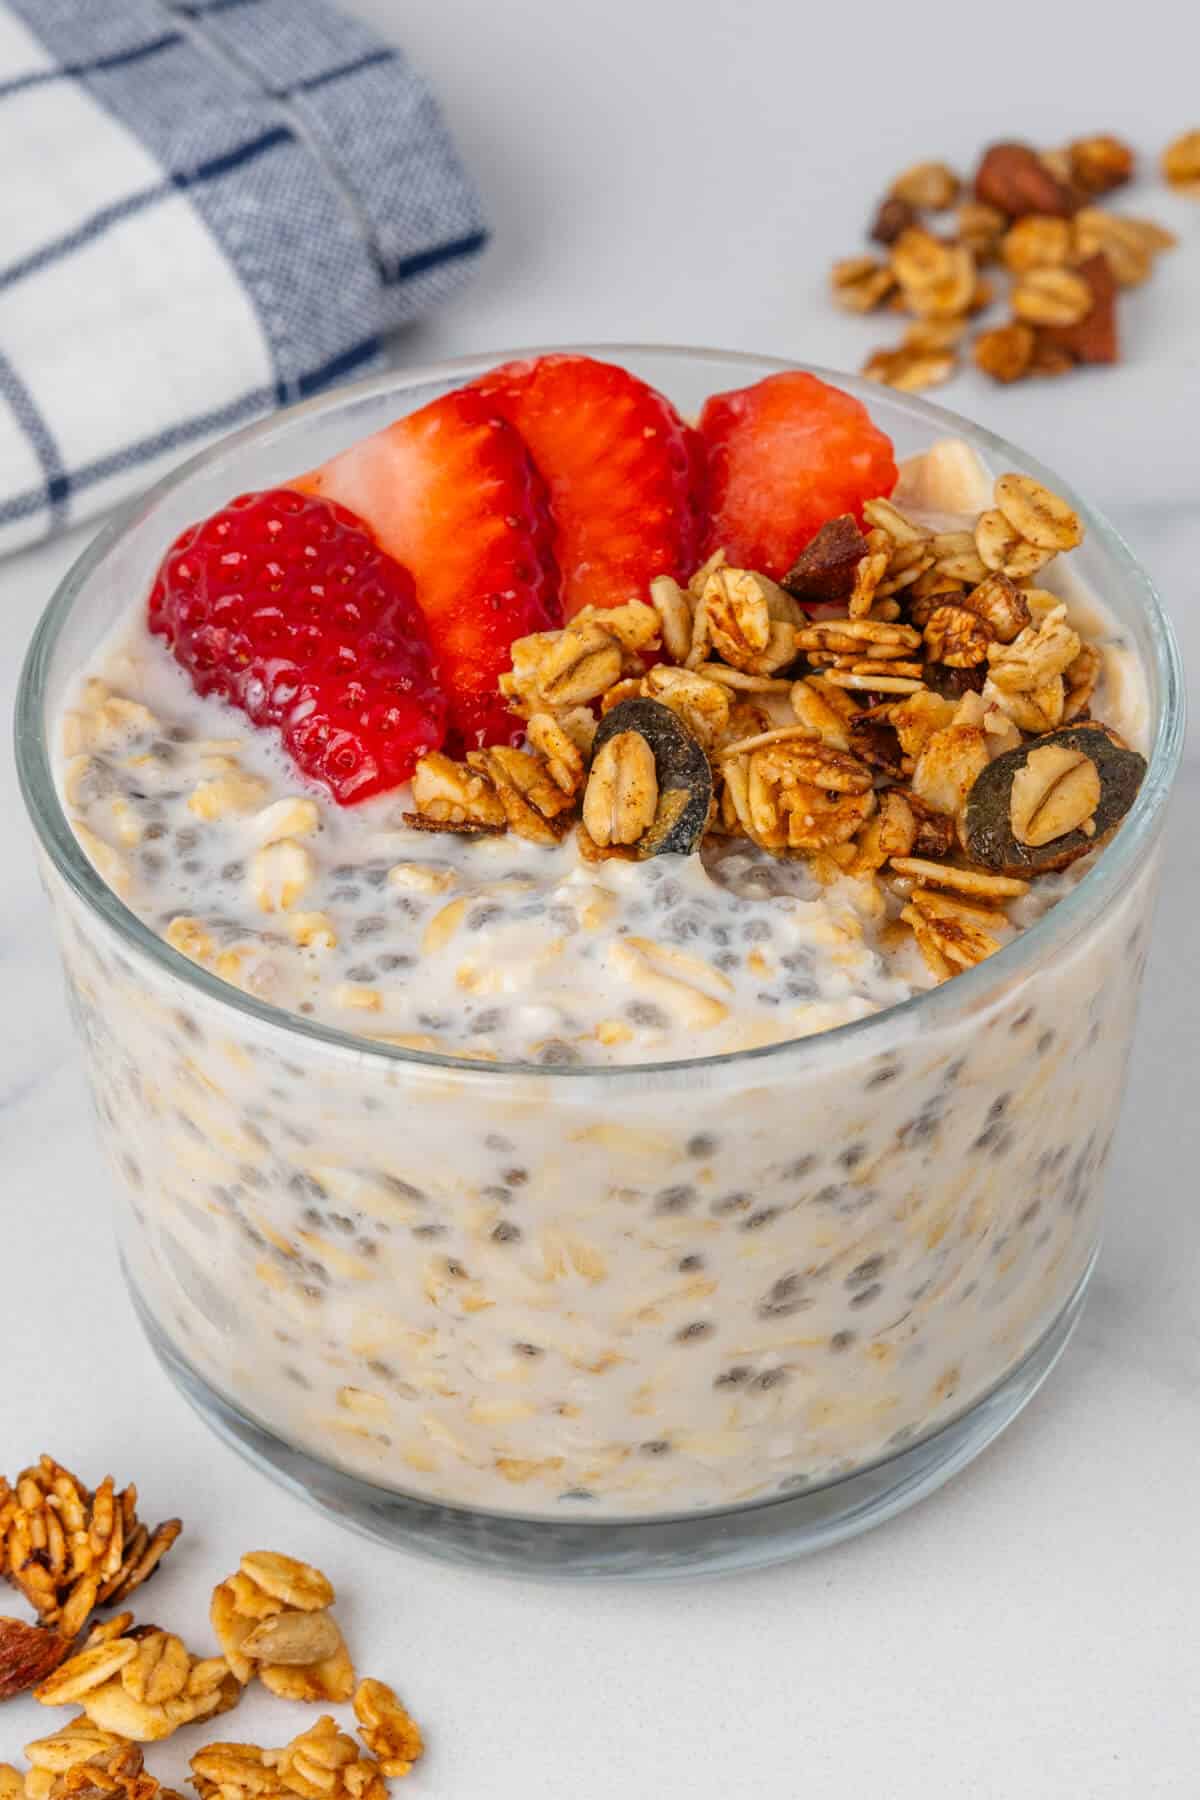 Classic flavor with strawberries and granola toppings